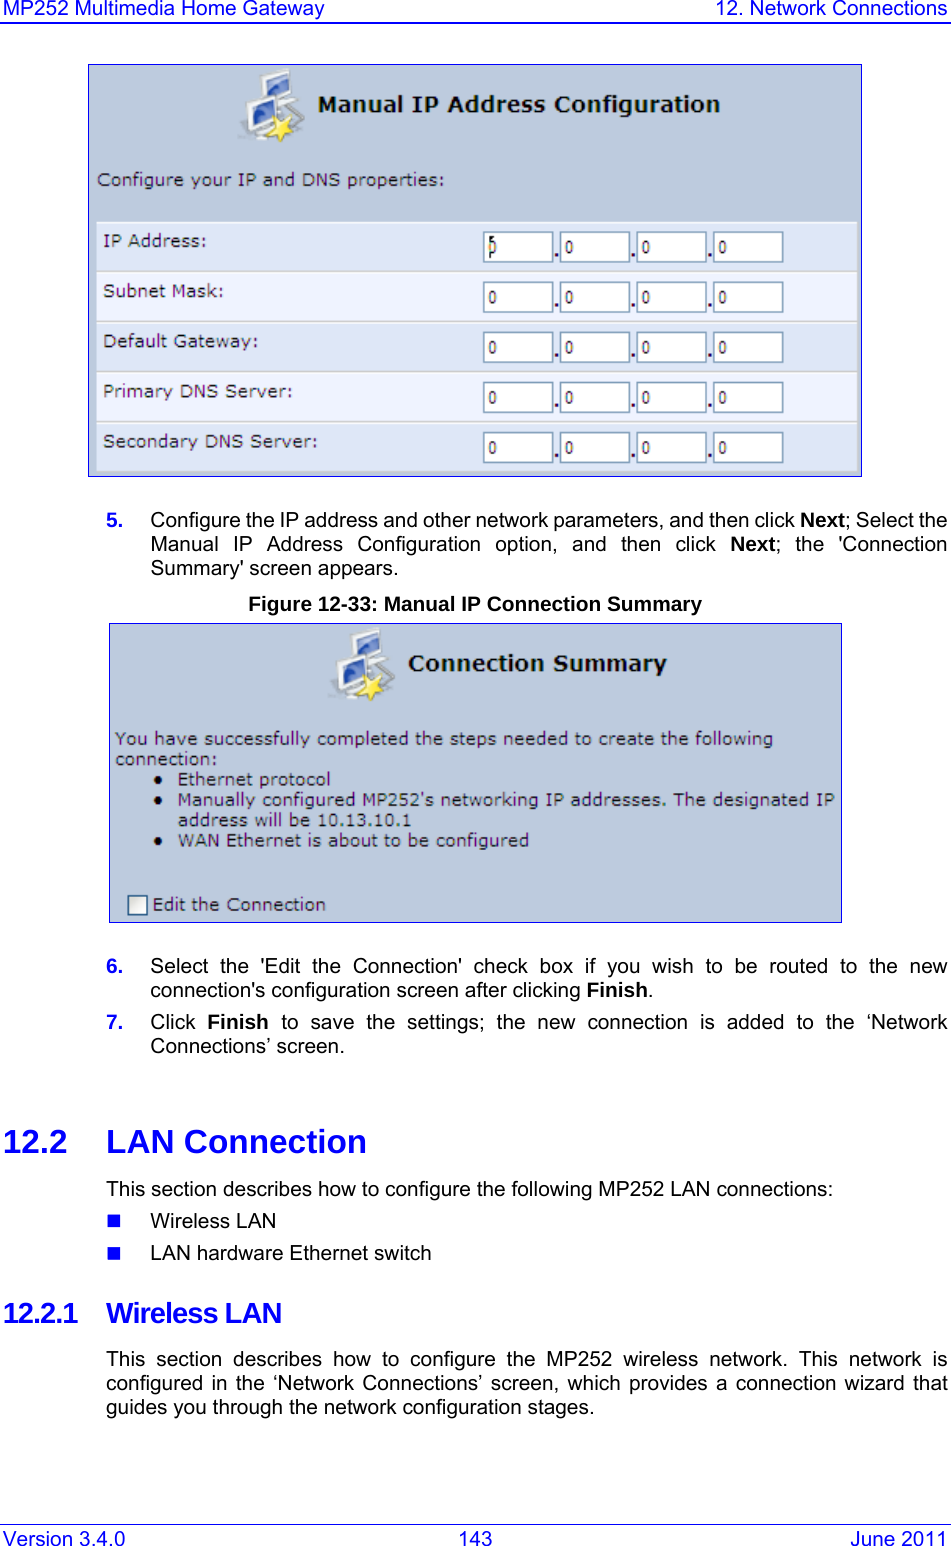 MP252 Multimedia Home Gateway  12. Network Connections Version 3.4.0  143  June 2011  5.  Configure the IP address and other network parameters, and then click Next; Select the Manual IP Address Configuration option, and then click Next; the &apos;Connection Summary&apos; screen appears. Figure 12-33: Manual IP Connection Summary  6.  Select the &apos;Edit the Connection&apos; check box if you wish to be routed to the new connection&apos;s configuration screen after clicking Finish. 7.  Click  Finish  to save the settings; the new connection is added to the ‘Network Connections’ screen.  12.2 LAN Connection This section describes how to configure the following MP252 LAN connections:  Wireless LAN   LAN hardware Ethernet switch 12.2.1 Wireless LAN This section describes how to configure the MP252 wireless network. This network is configured in the ‘Network Connections’ screen, which provides a connection wizard that guides you through the network configuration stages.  